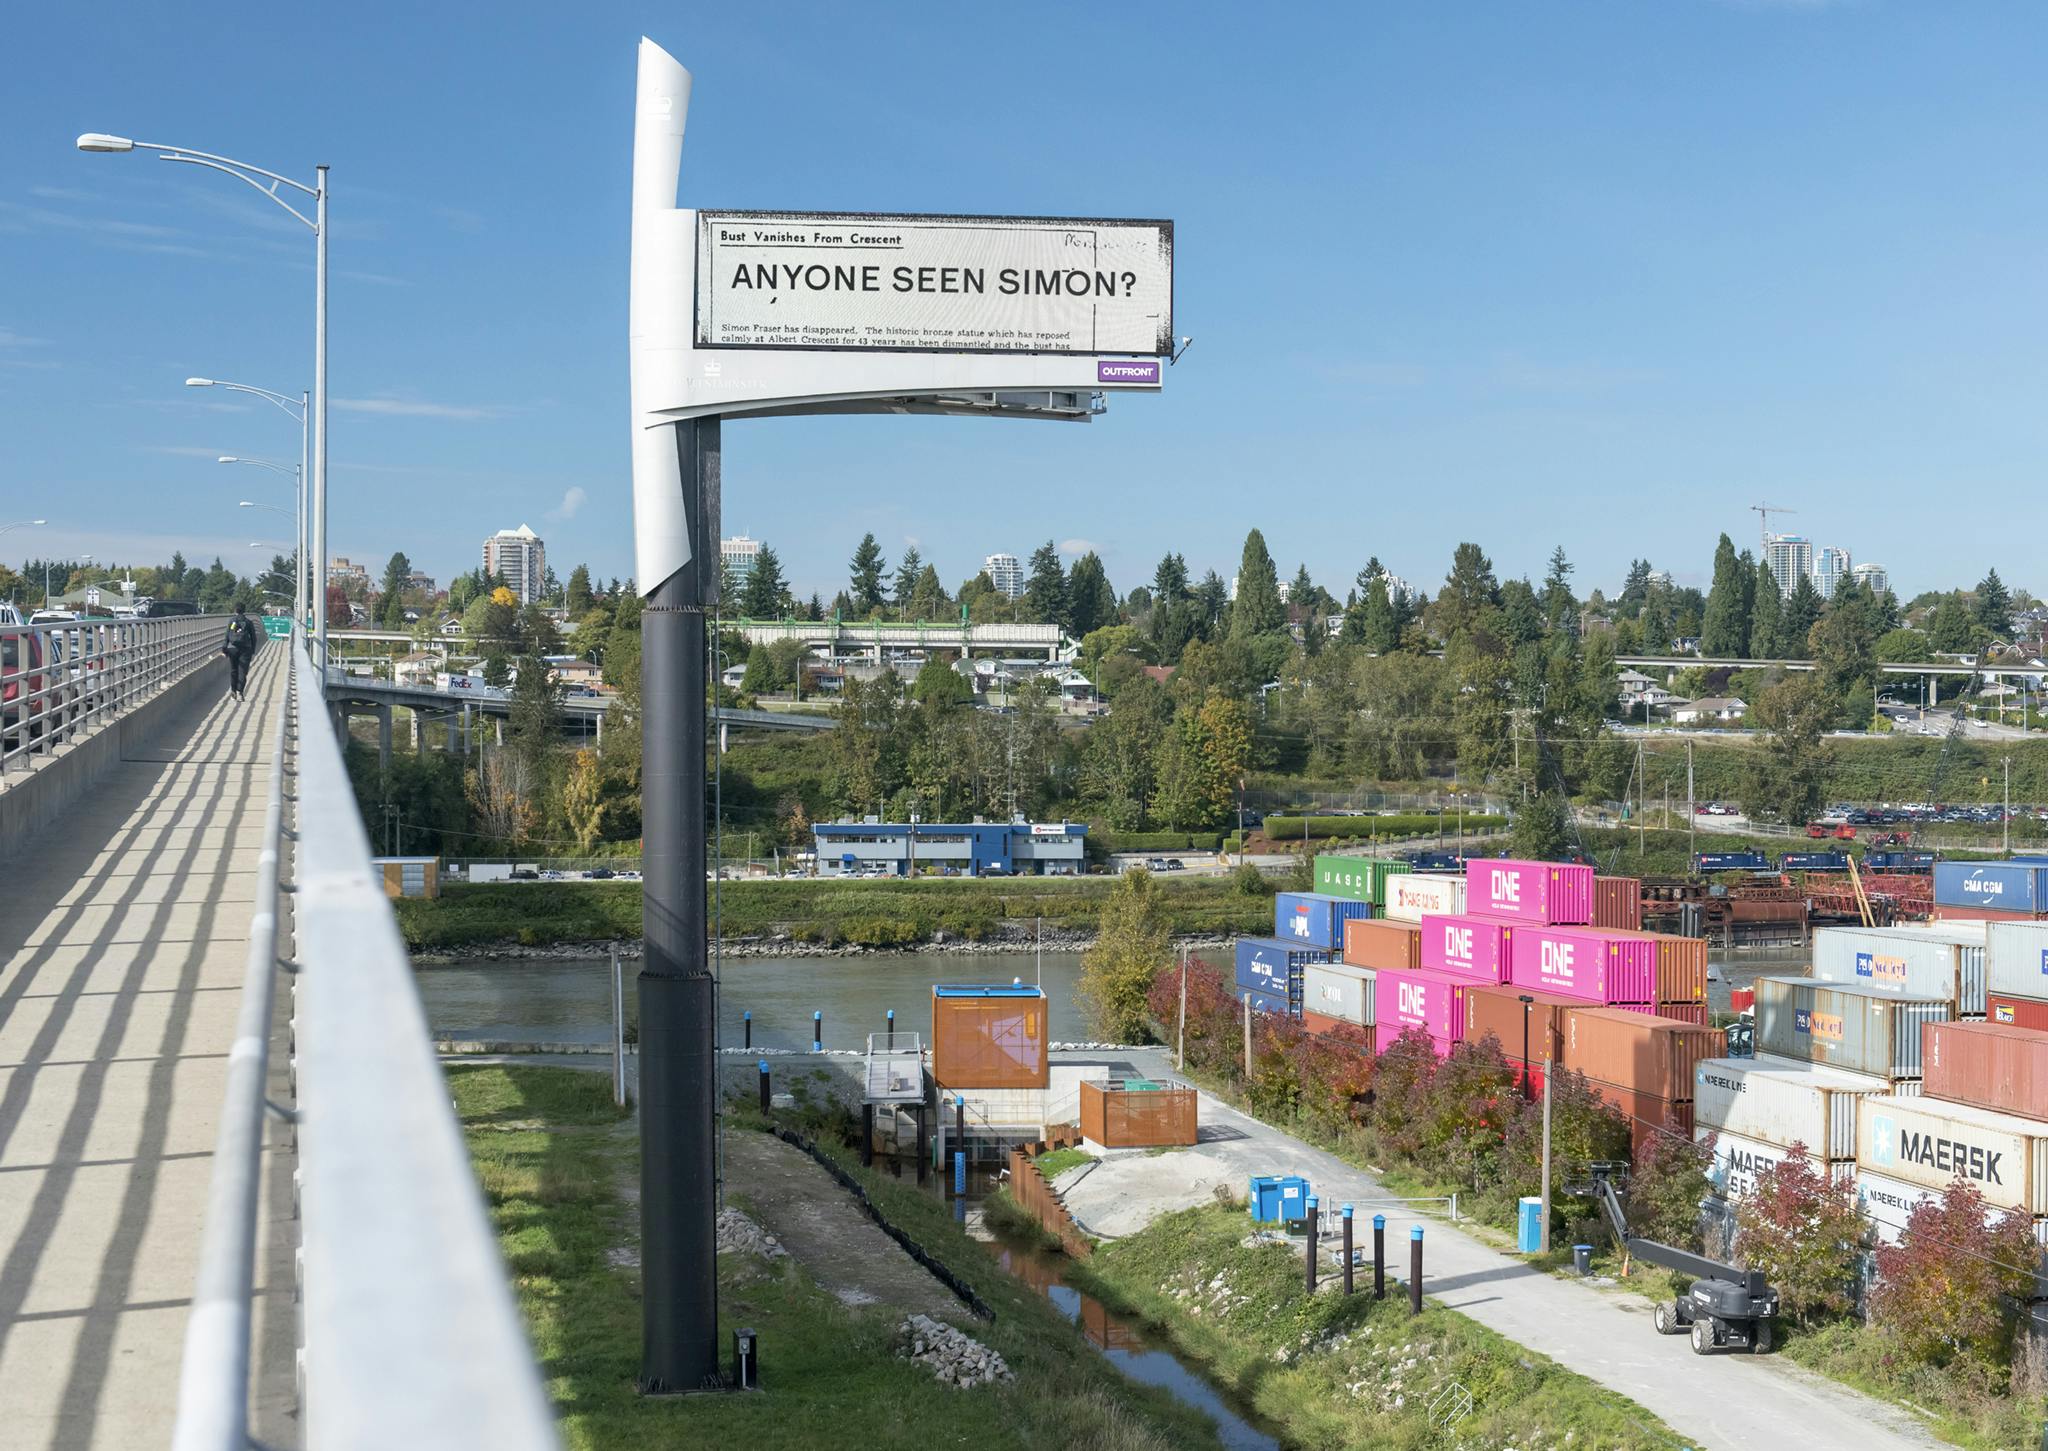 A billboard stands high off the ground with a bridge on one side and shipping containers on the other. The billboard reads “ANYONE SEEN SIMON?” in black text. 